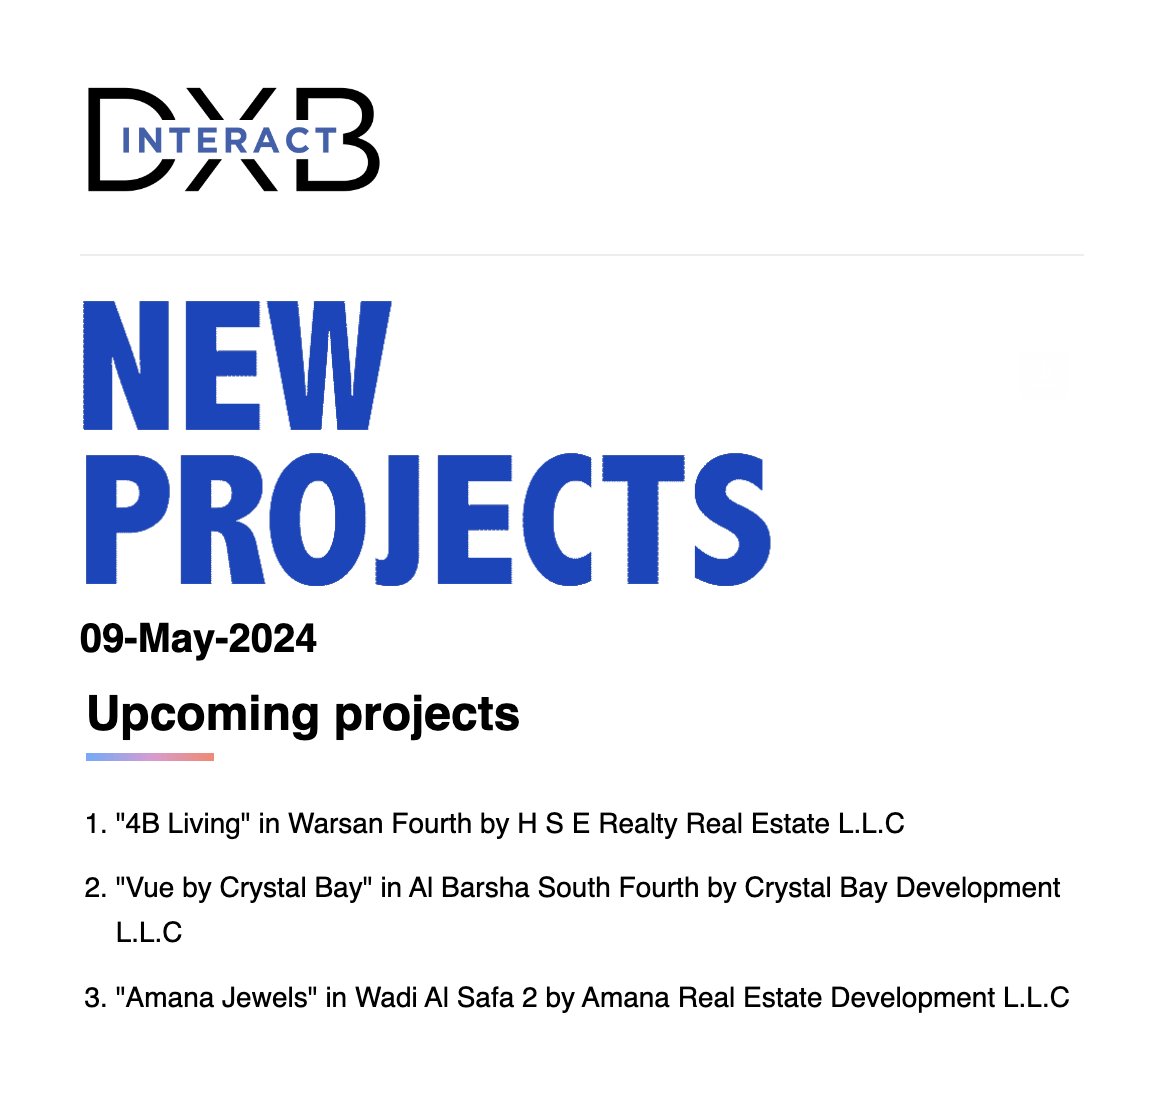 9-May, Projects Launched Today
DXBinteract.com

#NewProjects